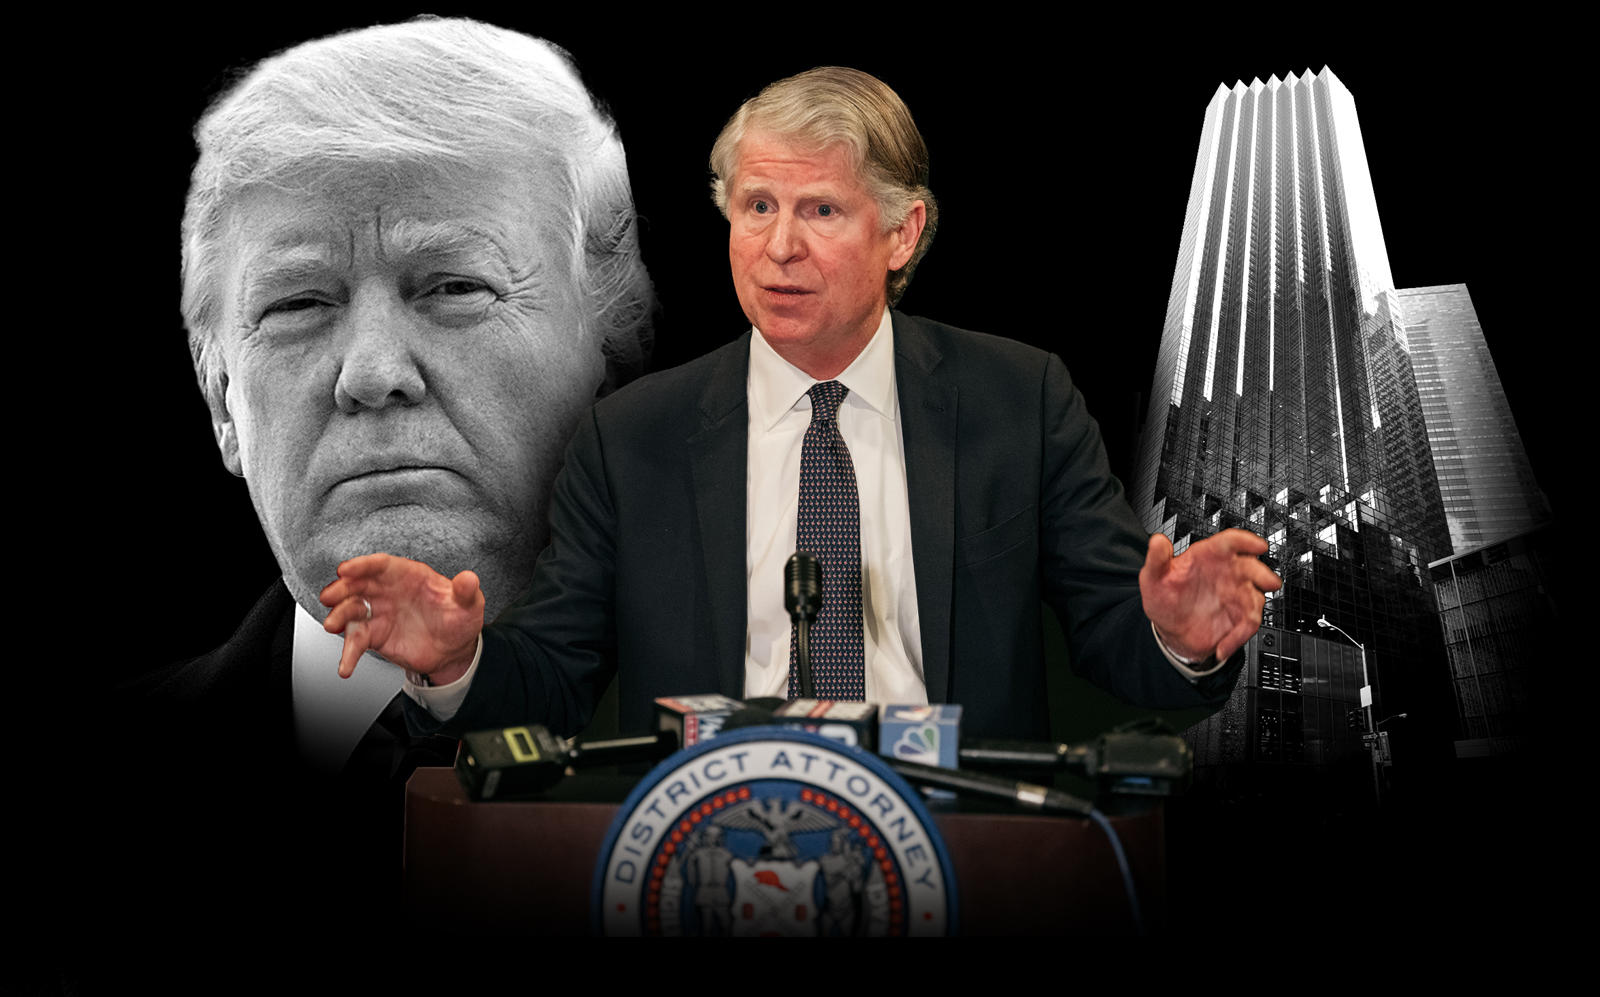 Donald Trump, Manhattan District Attorney Cy Vance and Trump Tower in New York (Photos via Getty, Wikipedia Commons)